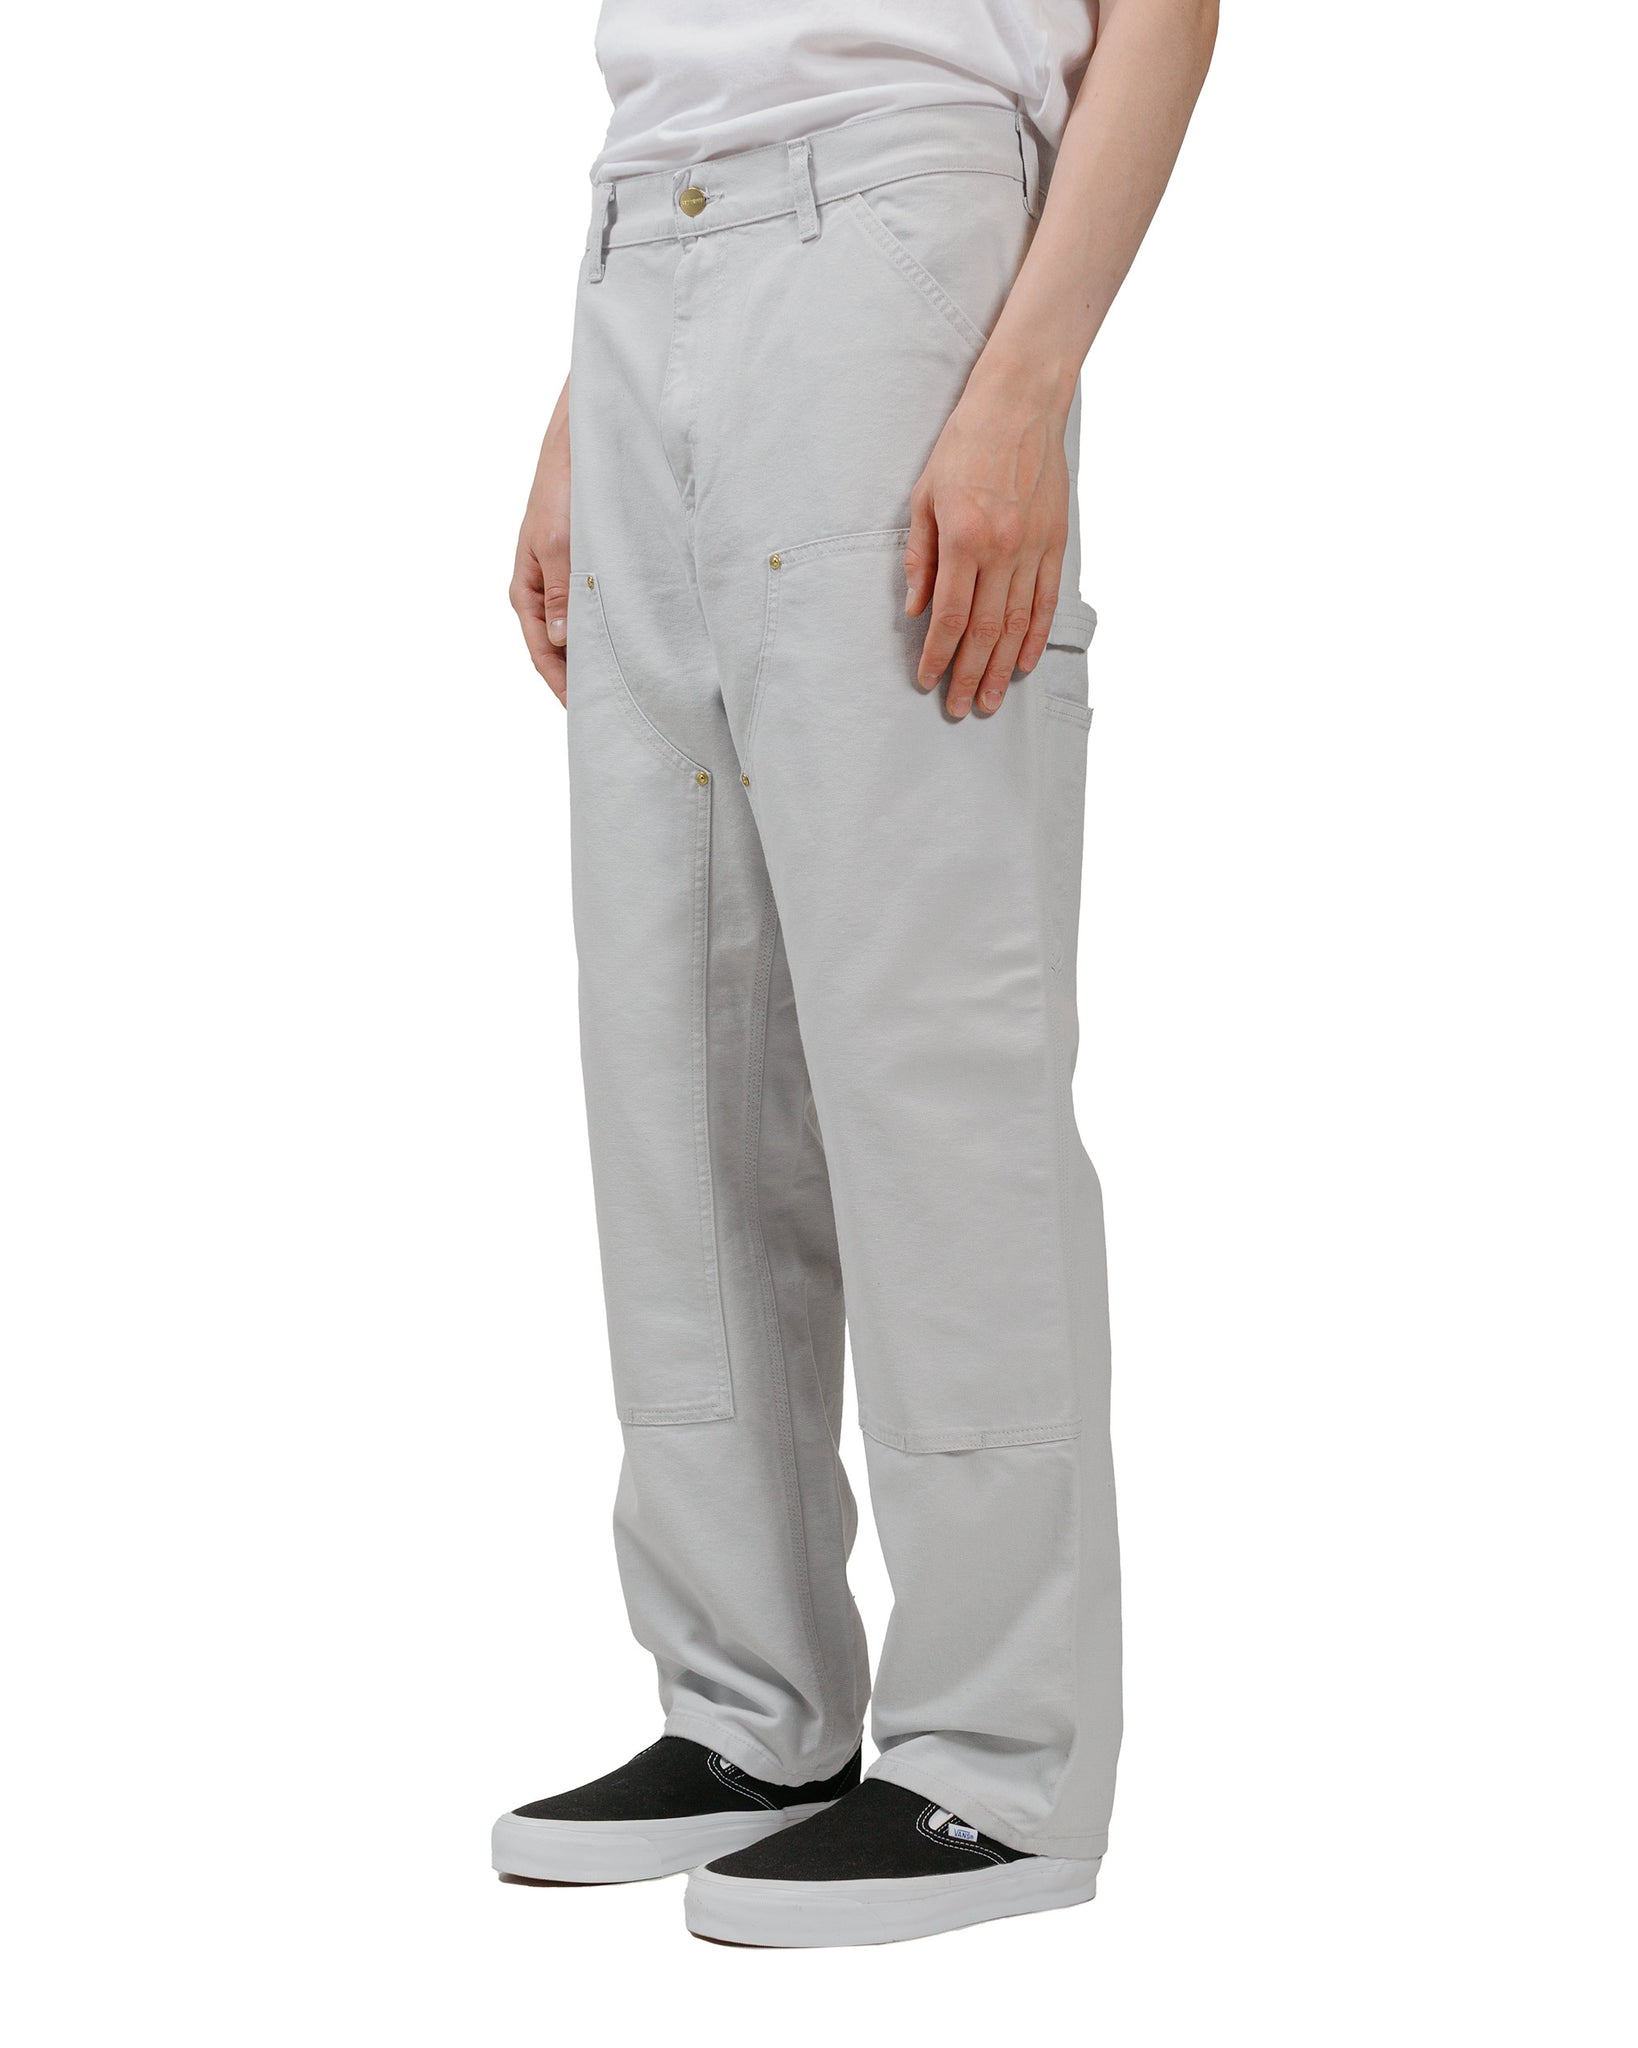 Carhartt W.I.P. Double Knee Pant Canvas Basalt Rinsed model front